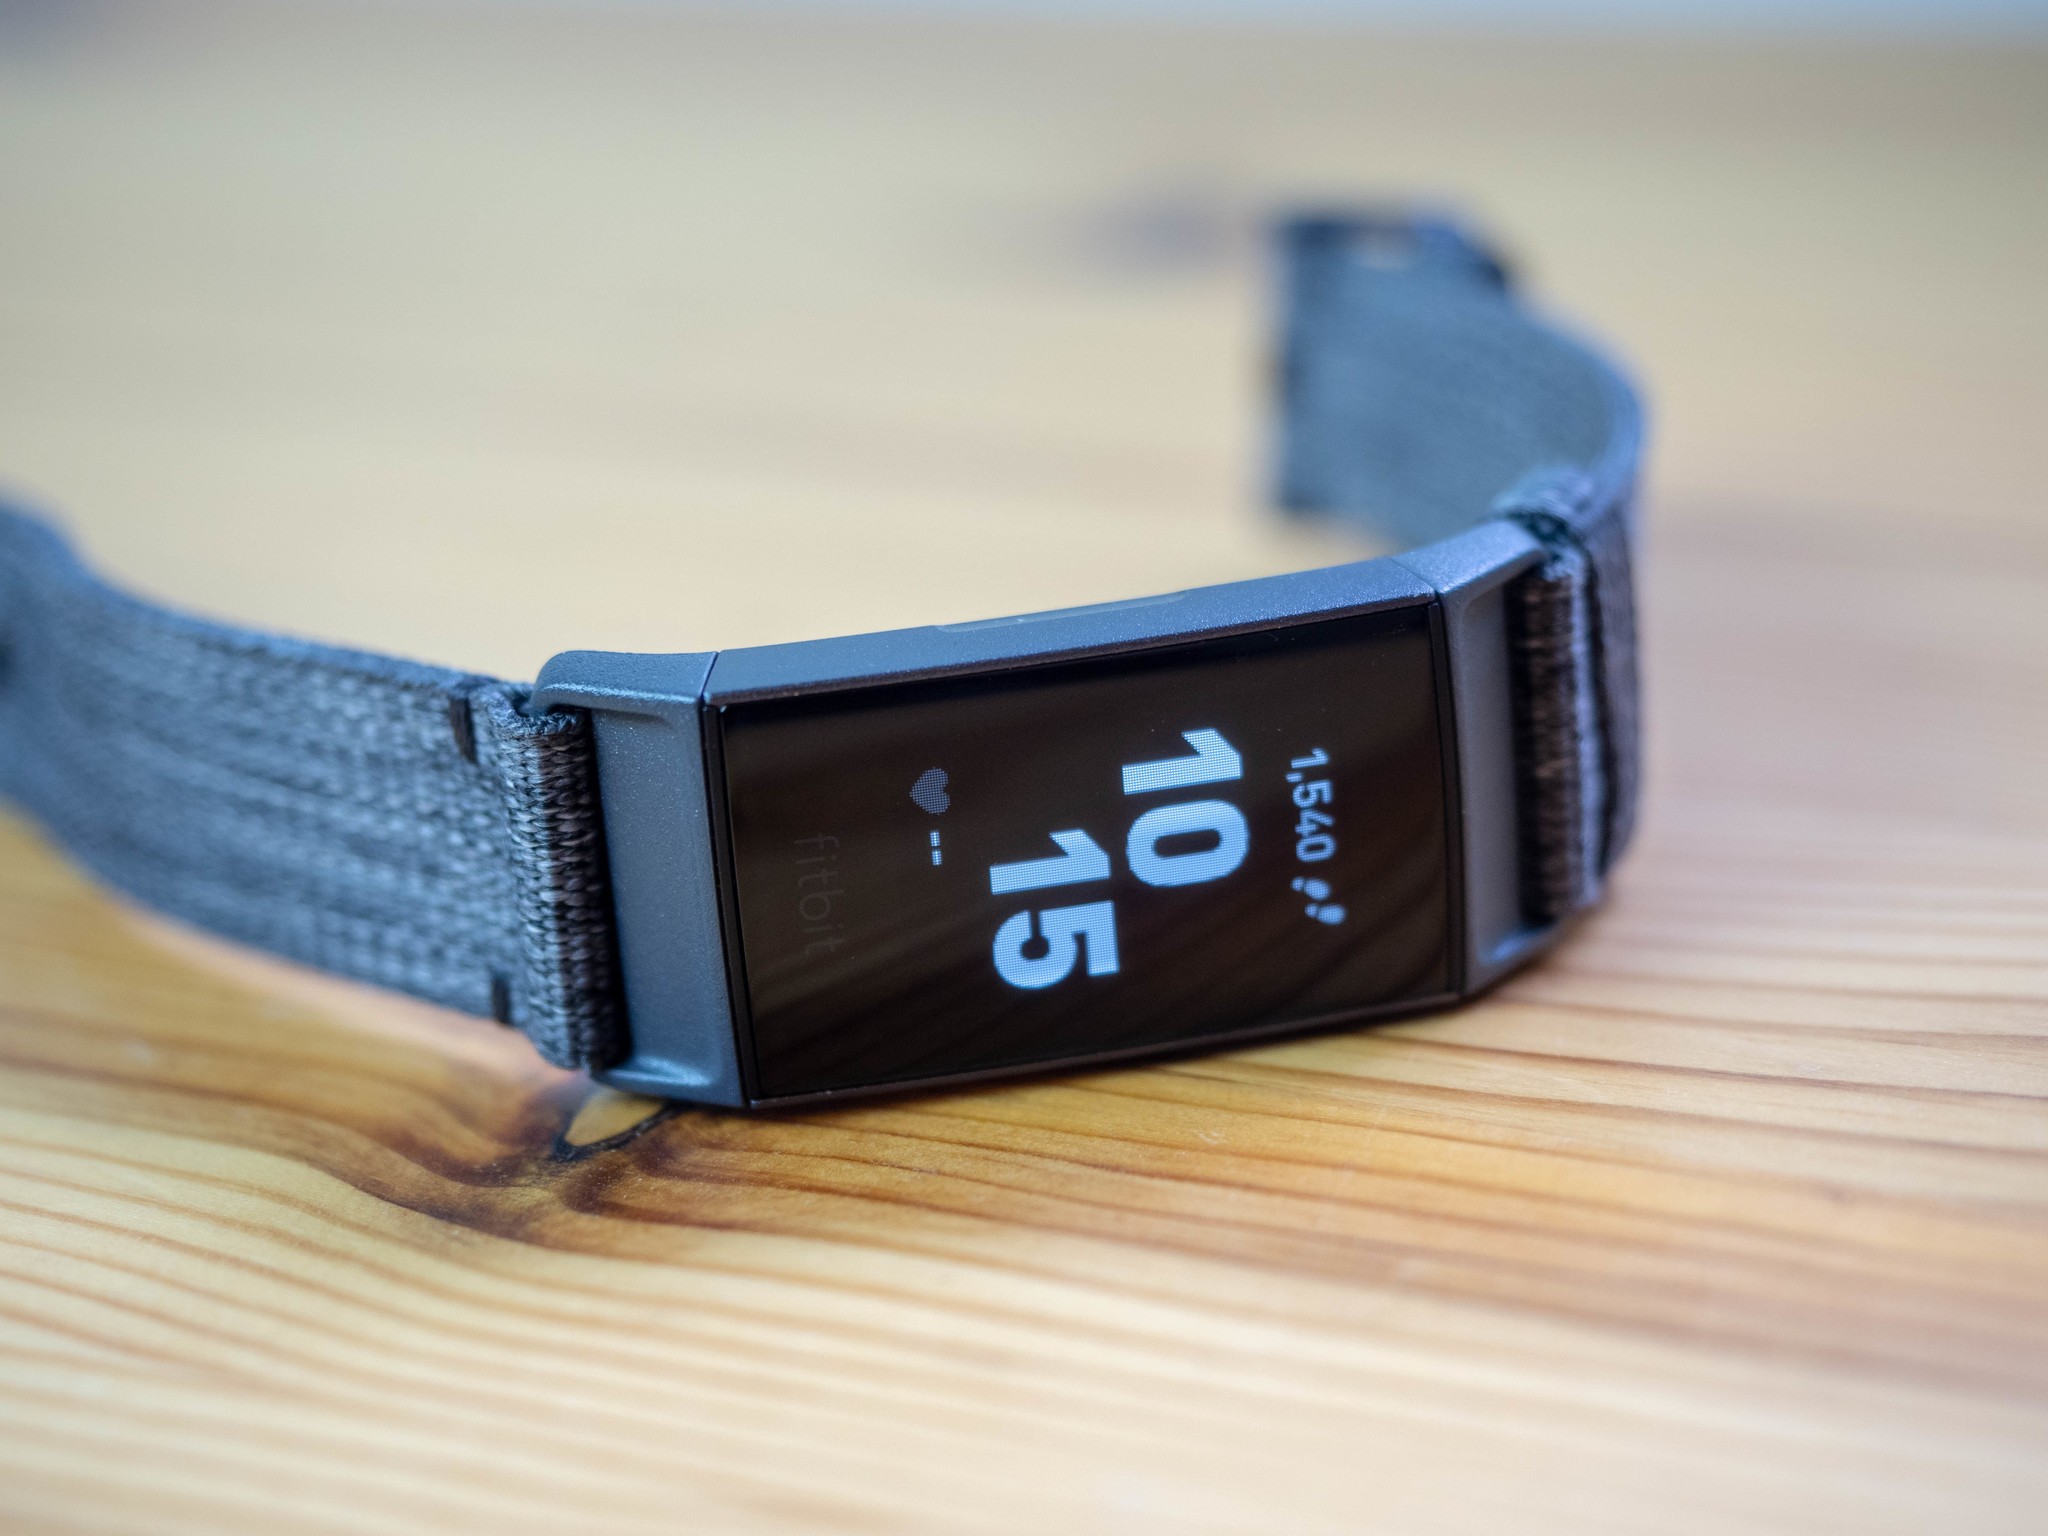 luxury fitbit bands